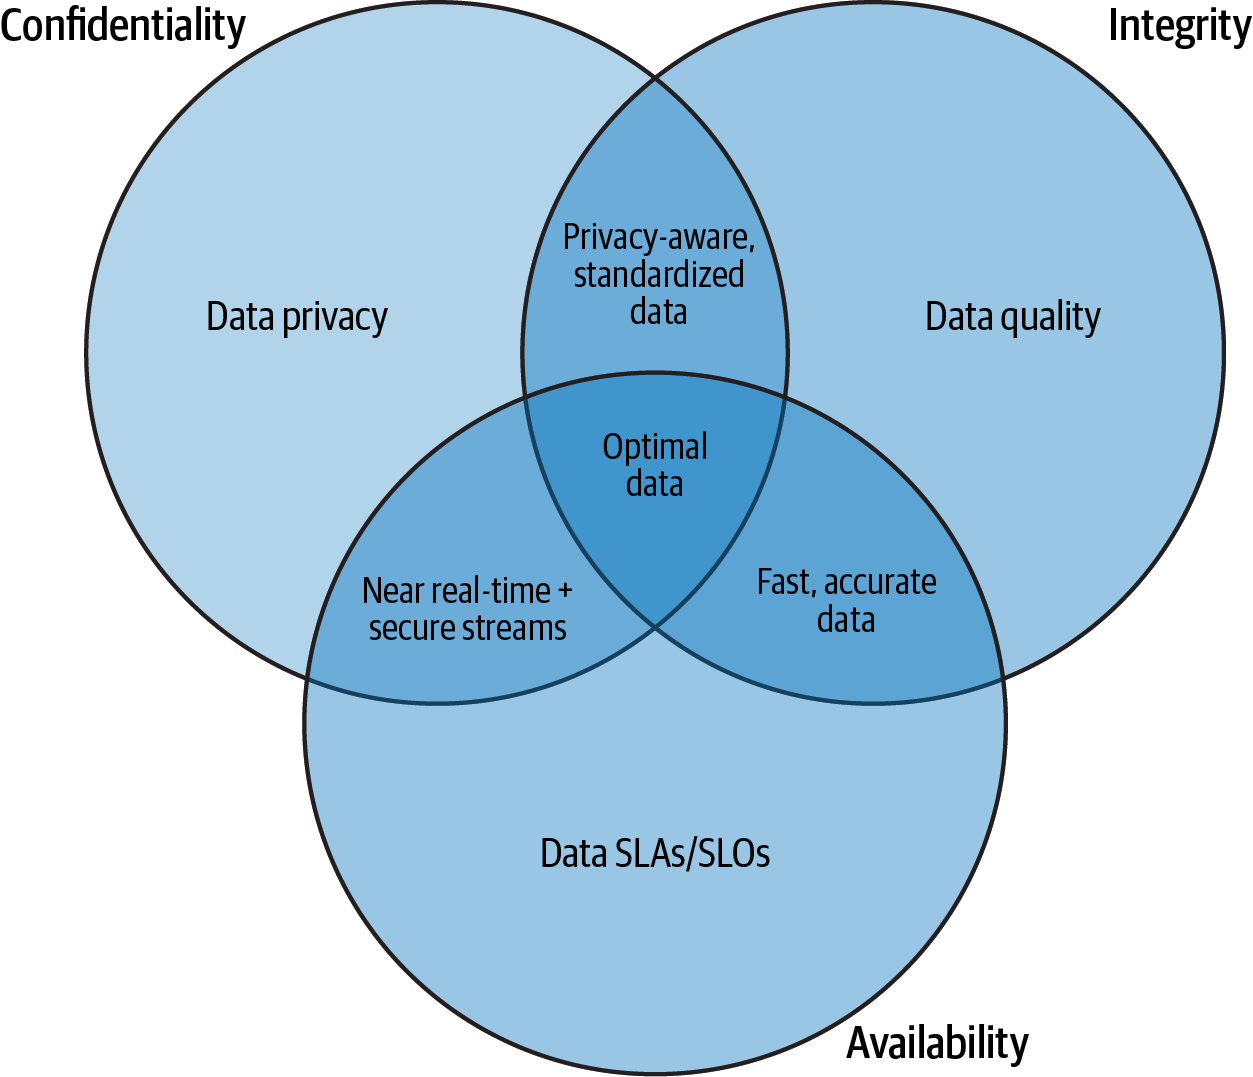 A diagram showing the overlaps between core data security principles and how you might view them in data science. For confidentiality, you can see how data privacy would help. For integrity, you can look at data quality. For availability you might have Service Level Agreements (SLAs) or Service Level Objectives (SLOs). You can see some overlaps between them, including optimal data in the middle, privacy-aware standardized data where confidentiality and integrity intersect, fast and accurate data where availability and integrity intersect and near-real time and secure streams where confidentiality and availability intersect.